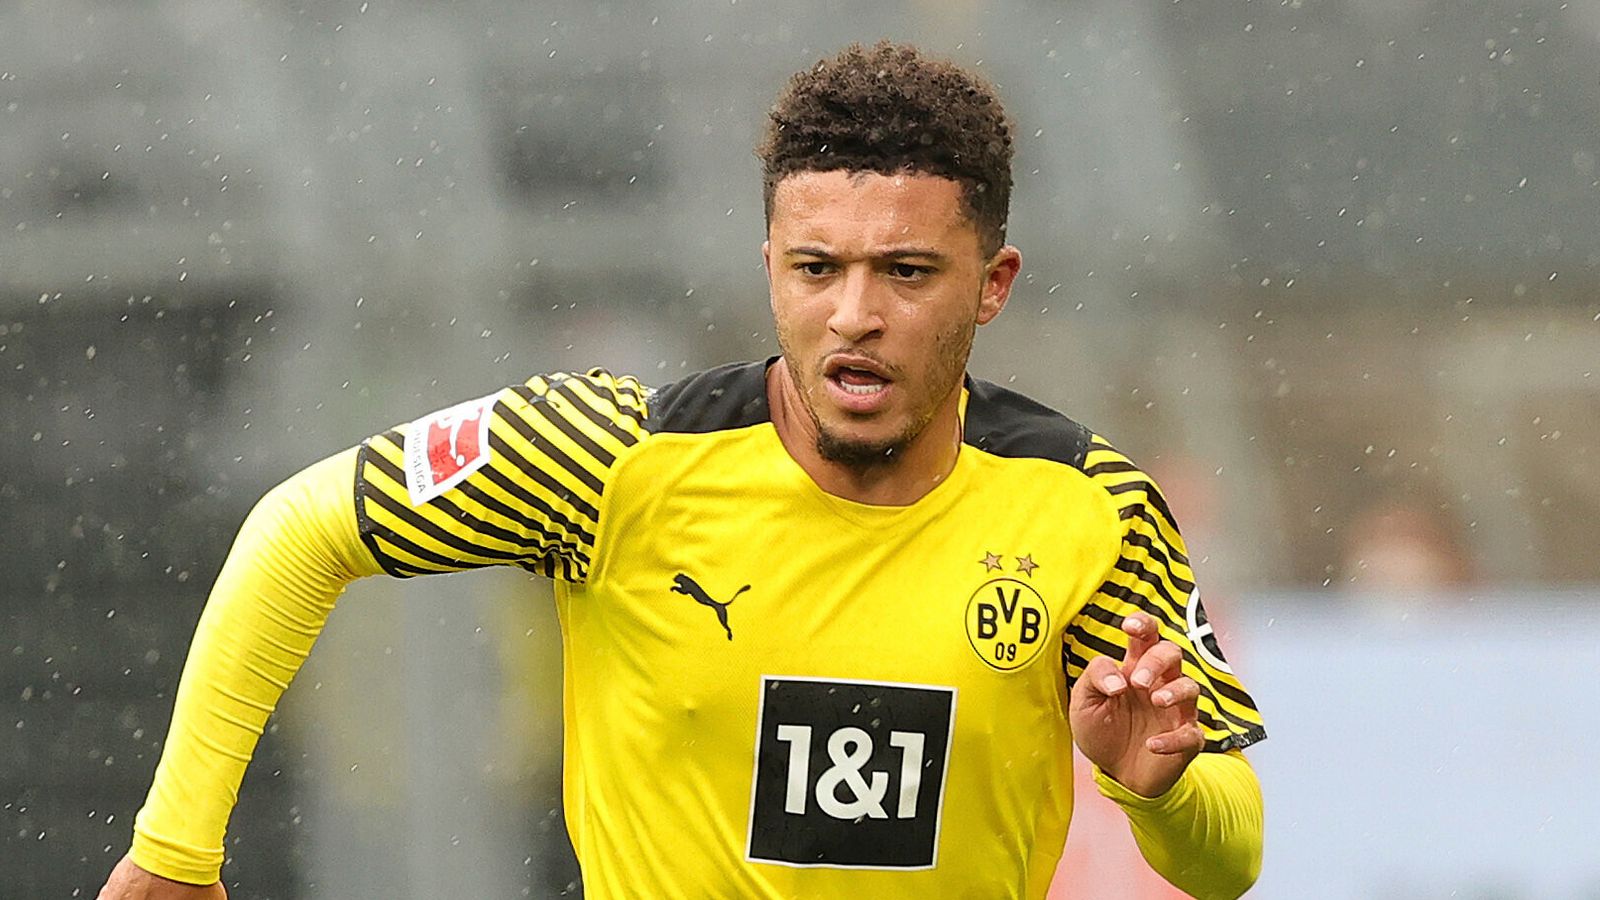 Jadon Sancho: Manchester United transfer negotiations continue with  Dortmund; a &quot;cautiously optimistic&quot; agreement can be reached by all parties  | Football news - Insider Voice